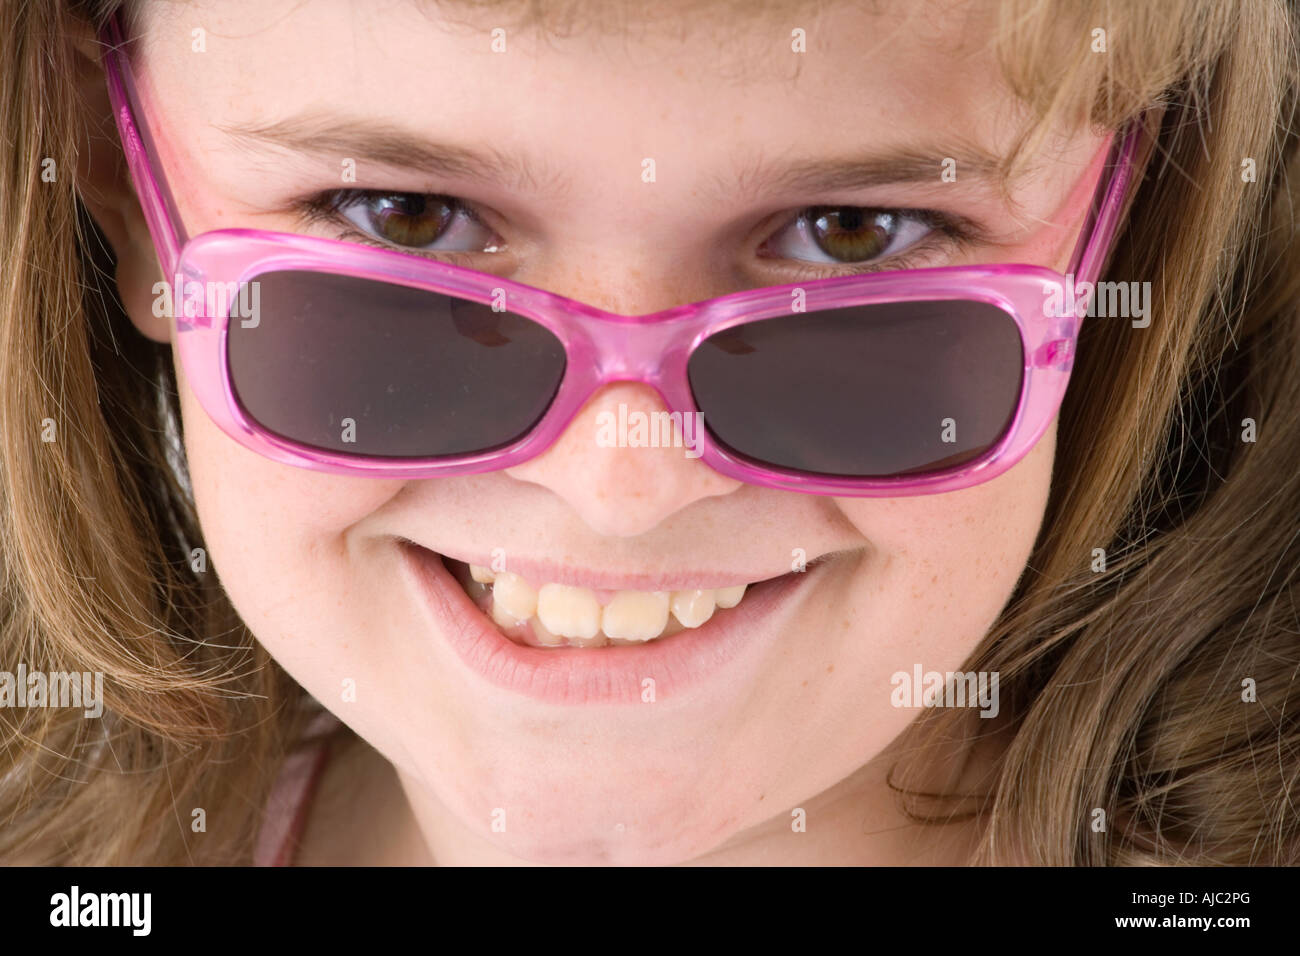 Young Girl Wearing Pink Sunglasses - Close-Up Stock Photo